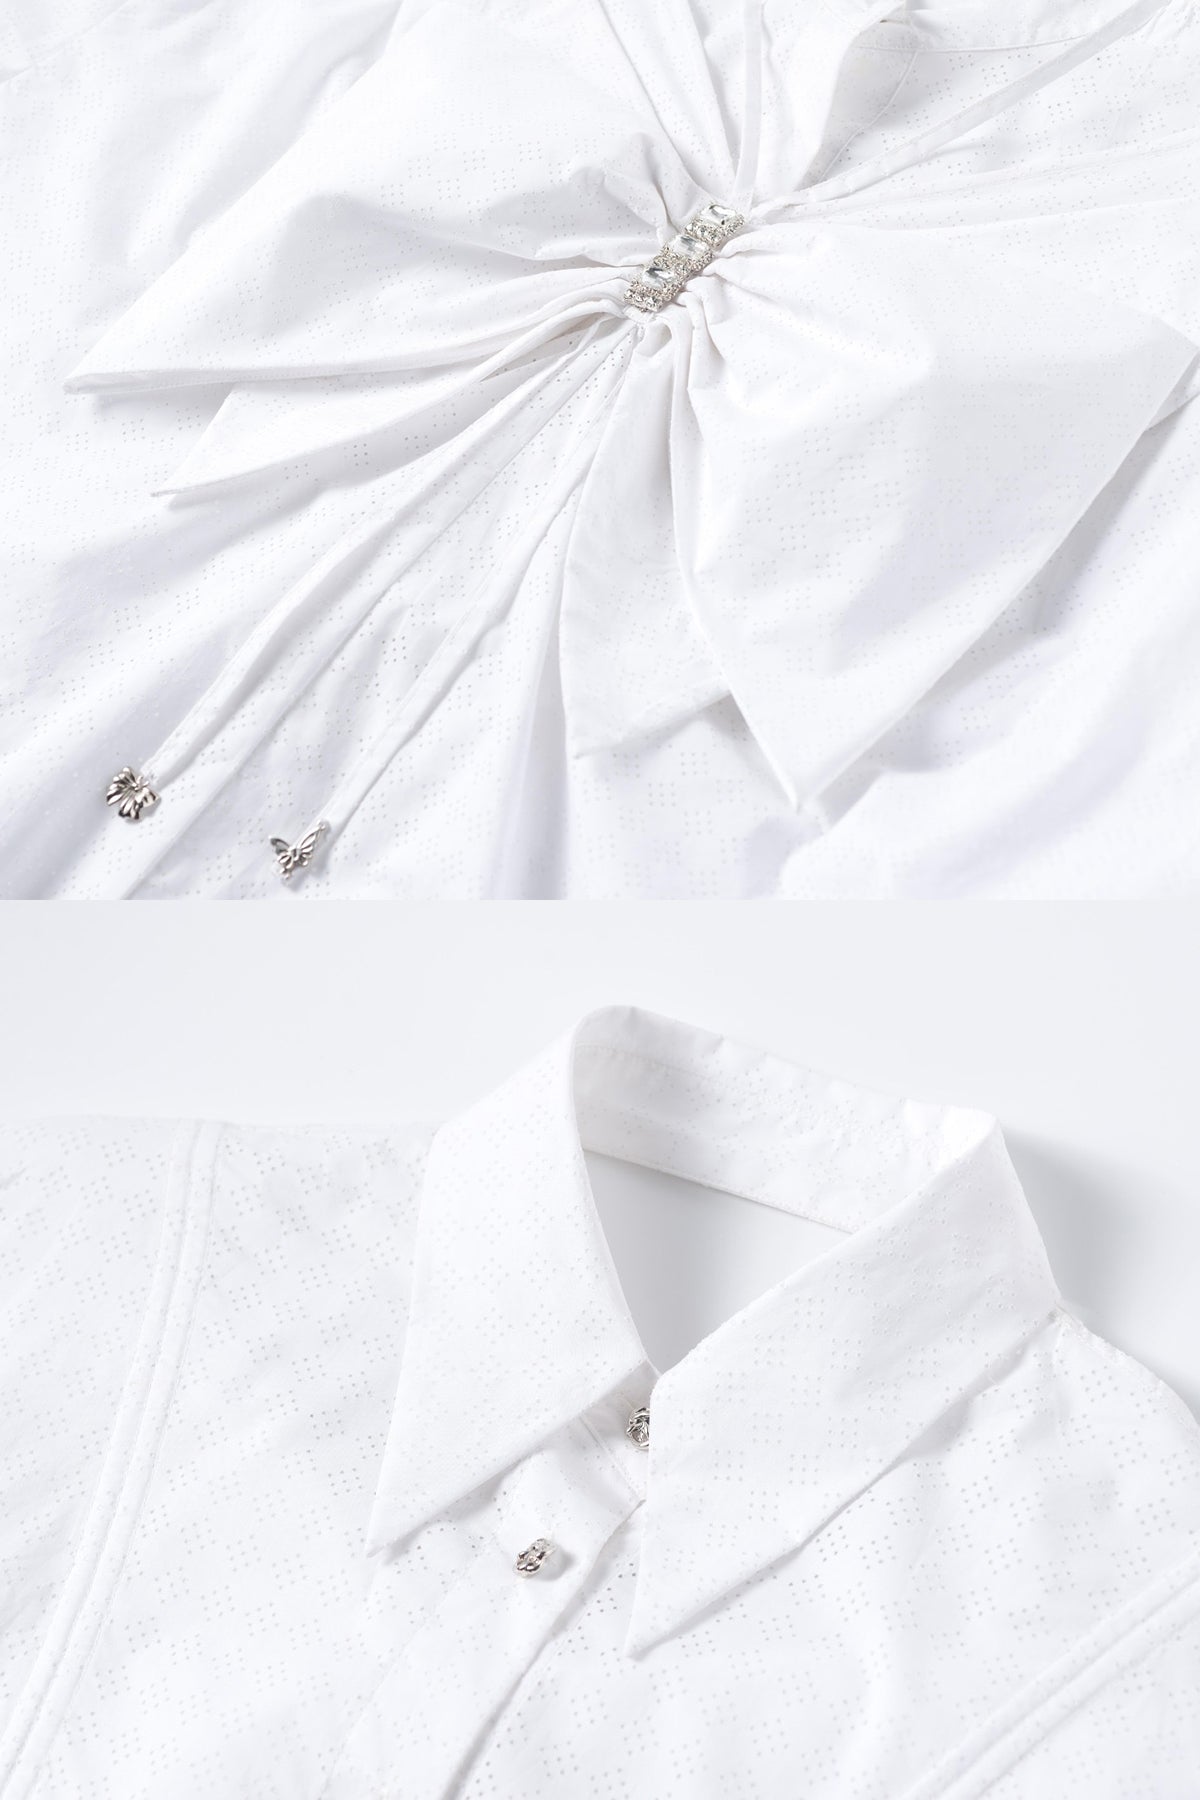 Mukzin | Cut out Front and Back White Shirt